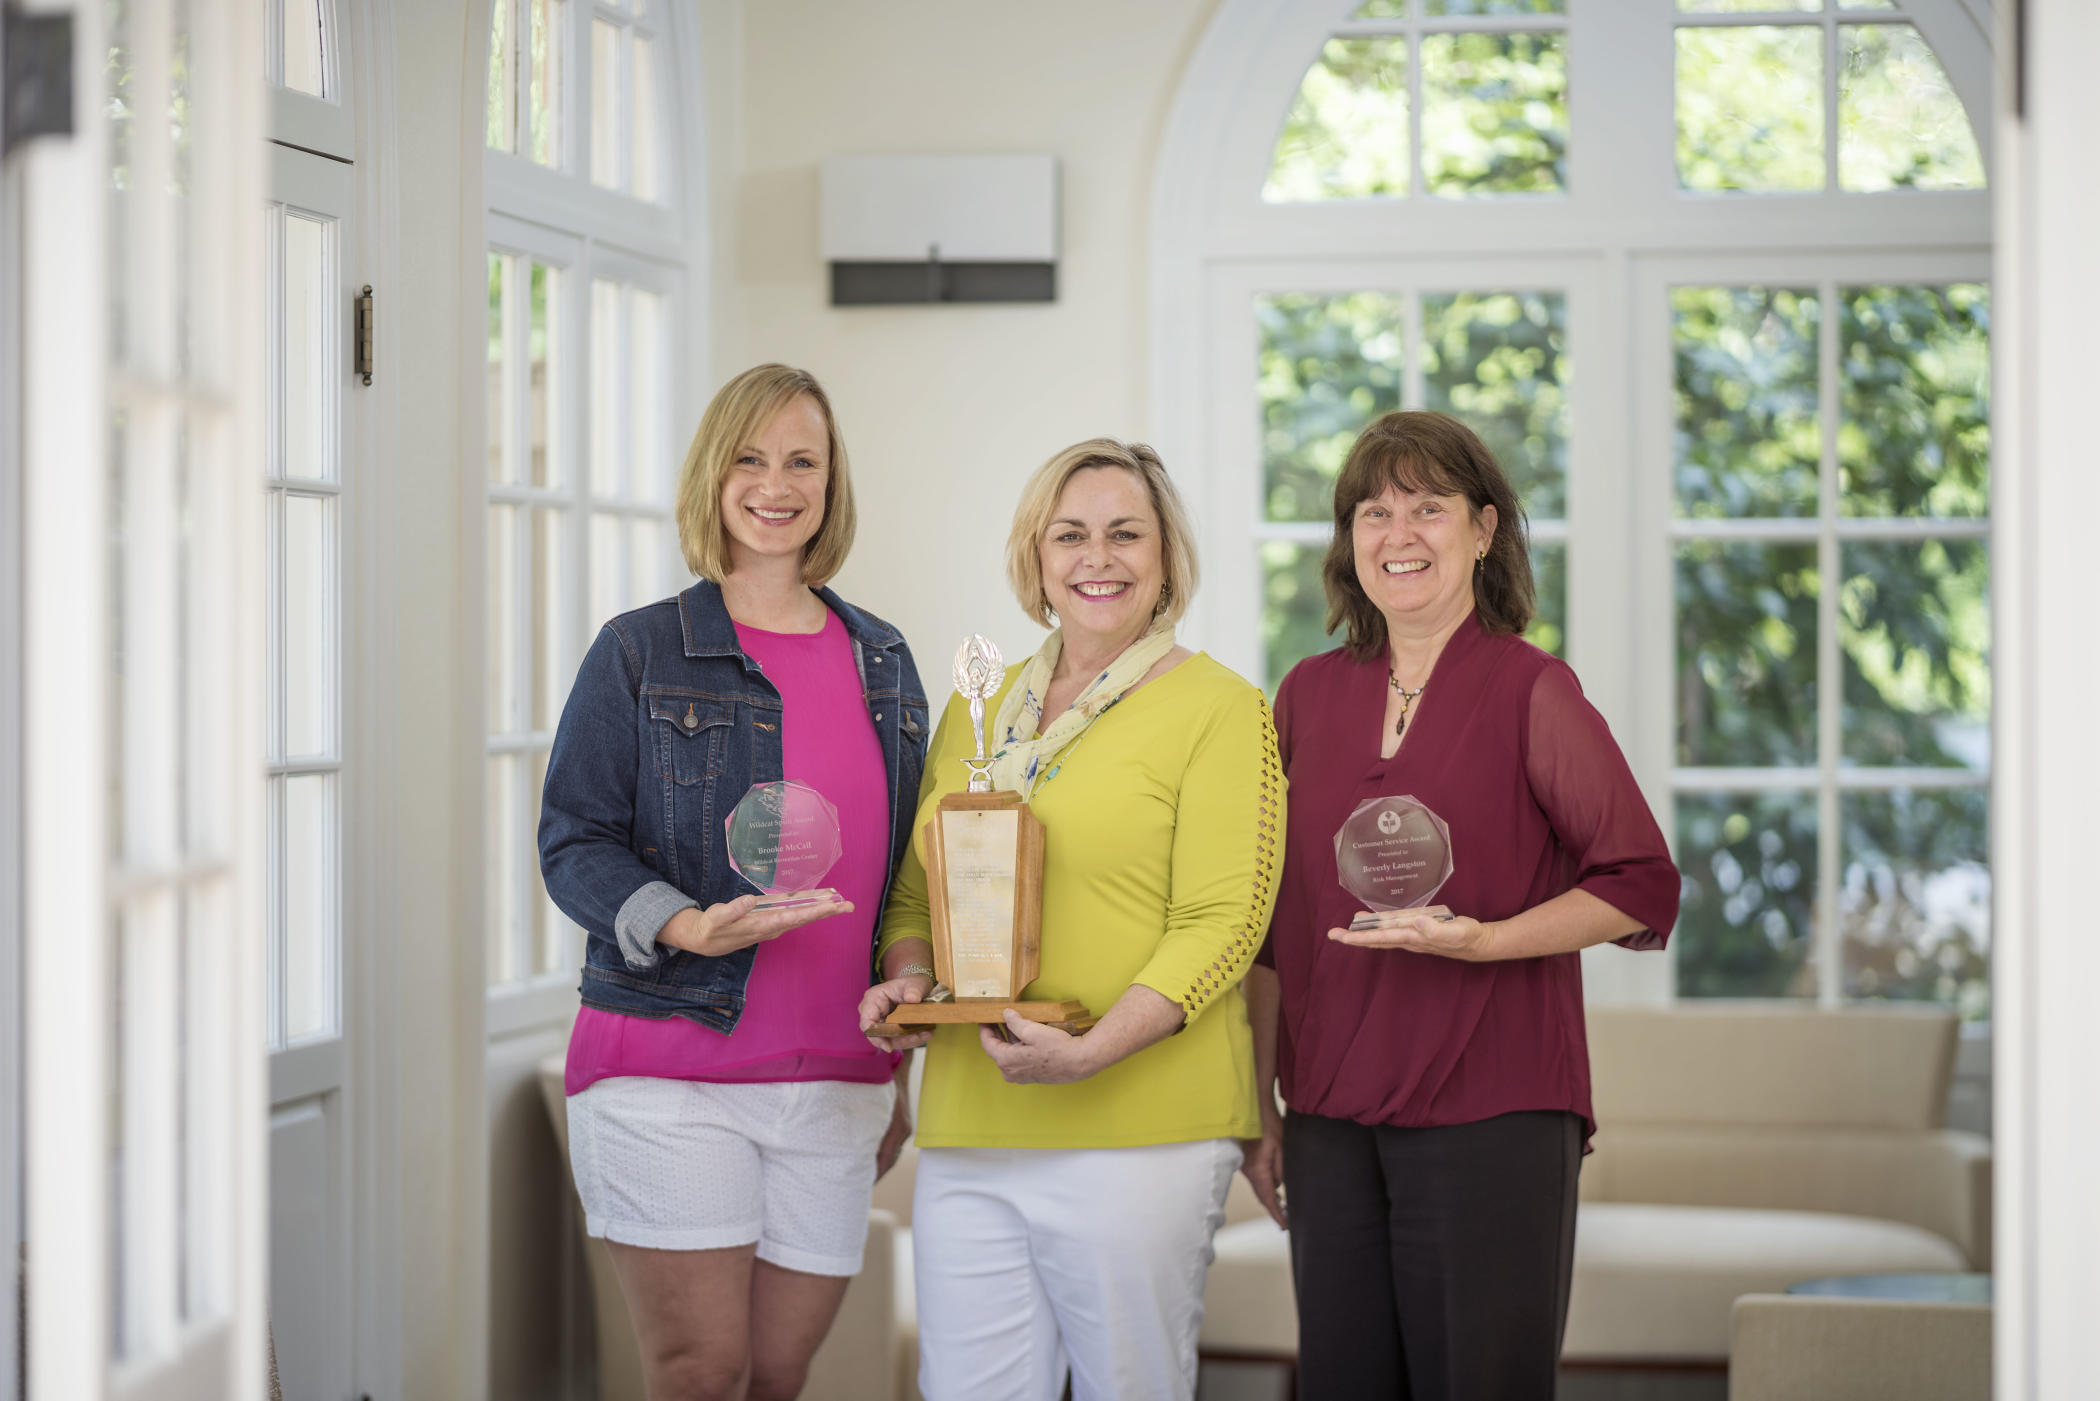 (Left to right) Brooke McCall, Kathleen Moroney, and Bev Langston pose with their awards.